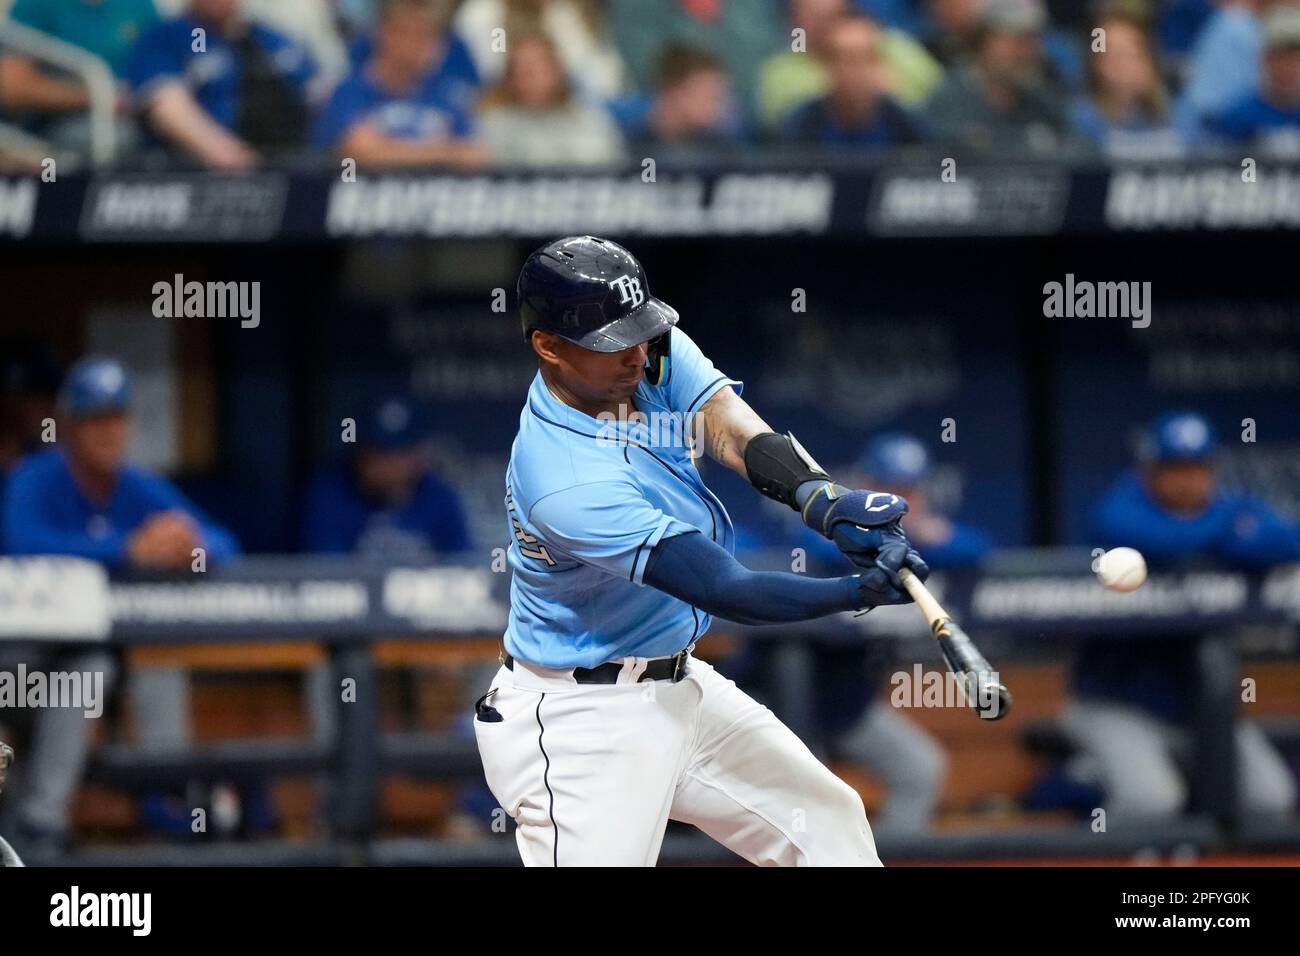 Tampa Bay Rays Christian Bethancourt flies out in the fourth inning of a  spring training baseball game against the Toronto Blue Jays in St.  Petersburg, Fla., Sunday, March 19, 2023. (AP Photo/Gerald